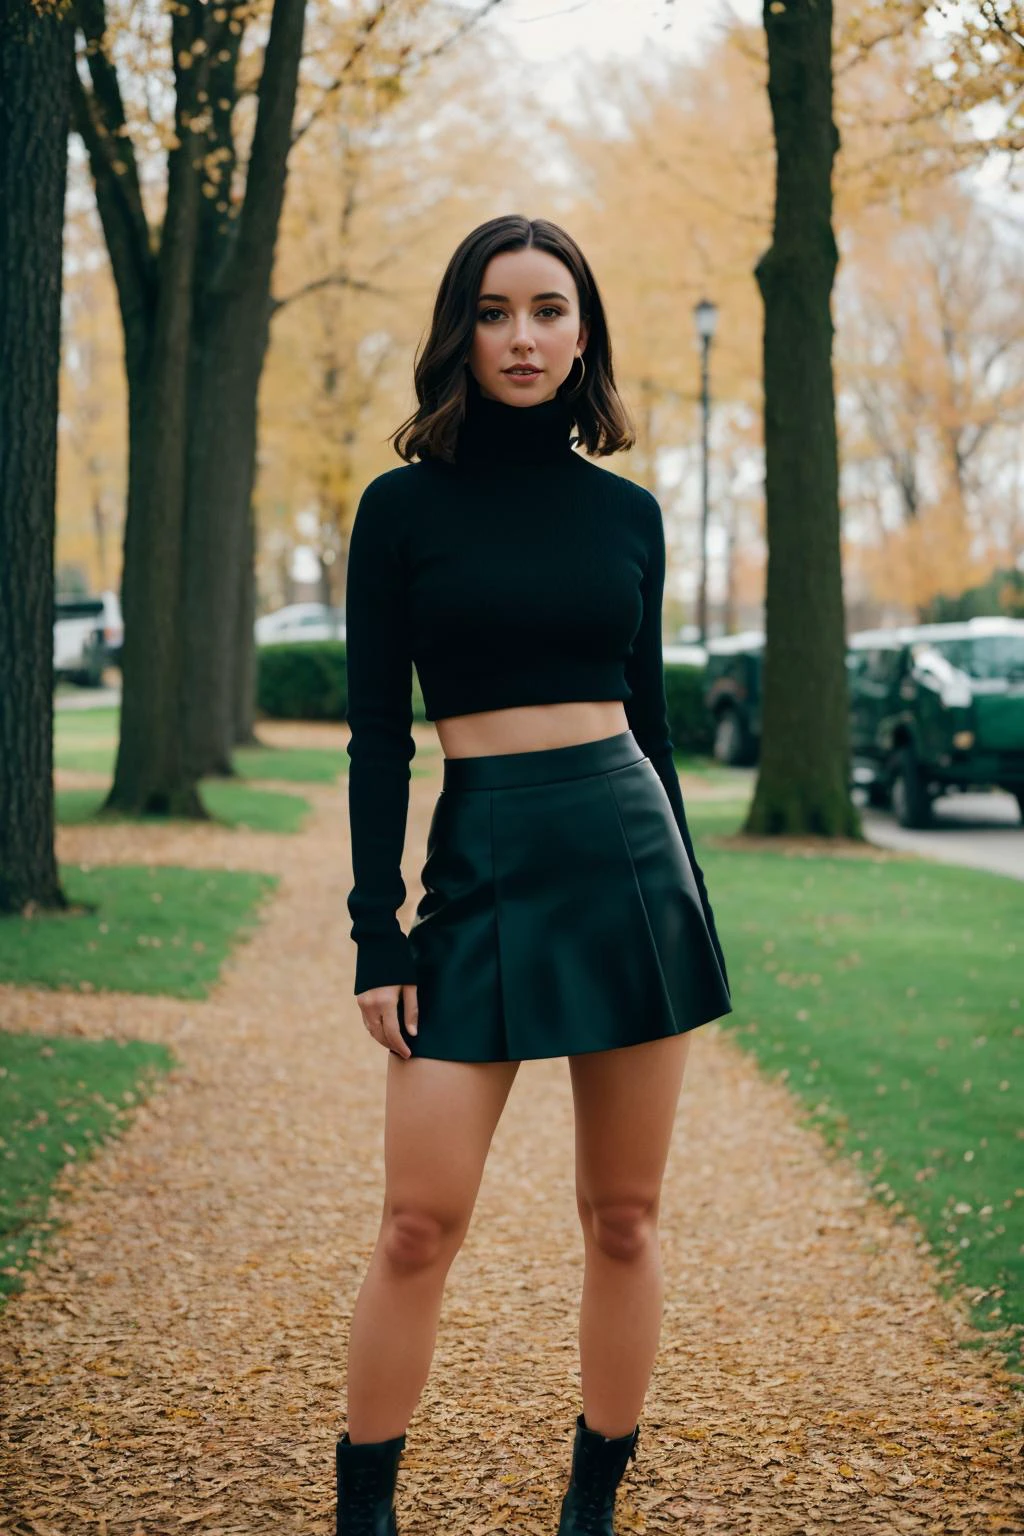 midriff, mnstfc, skirt, bodycon skirt, photography, edited in Adobe Lightroom, stunning intricate full color portrait, wearing a black turtleneck, epic character composition, by ilya kuvshinov, alessio albi, nina masic, sharp focus, natural lighting, subsurface scattering, f2, 35mm, film grain